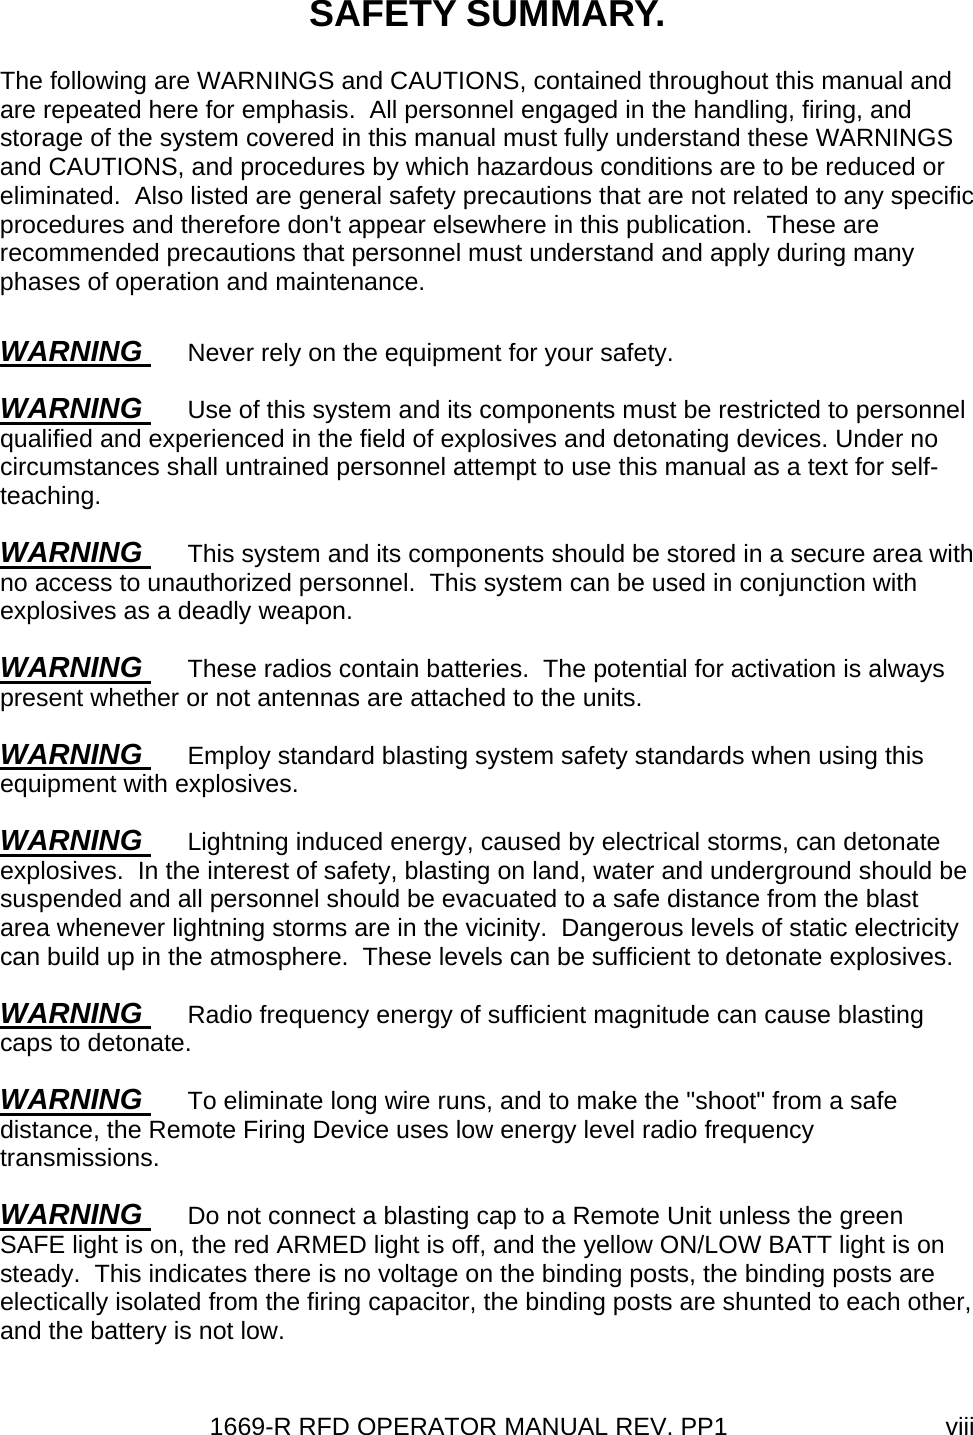 1669-R RFD OPERATOR MANUAL REV. PP1  viiiSAFETY SUMMARY. The following are WARNINGS and CAUTIONS, contained throughout this manual and are repeated here for emphasis.  All personnel engaged in the handling, firing, and storage of the system covered in this manual must fully understand these WARNINGS and CAUTIONS, and procedures by which hazardous conditions are to be reduced or eliminated.  Also listed are general safety precautions that are not related to any specific procedures and therefore don&apos;t appear elsewhere in this publication.  These are recommended precautions that personnel must understand and apply during many phases of operation and maintenance. WARNING  Never rely on the equipment for your safety. WARNING  Use of this system and its components must be restricted to personnel qualified and experienced in the field of explosives and detonating devices. Under no circumstances shall untrained personnel attempt to use this manual as a text for self-teaching. WARNING  This system and its components should be stored in a secure area with no access to unauthorized personnel.  This system can be used in conjunction with explosives as a deadly weapon. WARNING  These radios contain batteries.  The potential for activation is always present whether or not antennas are attached to the units.  WARNING  Employ standard blasting system safety standards when using this equipment with explosives. WARNING  Lightning induced energy, caused by electrical storms, can detonate explosives.  In the interest of safety, blasting on land, water and underground should be suspended and all personnel should be evacuated to a safe distance from the blast area whenever lightning storms are in the vicinity.  Dangerous levels of static electricity can build up in the atmosphere.  These levels can be sufficient to detonate explosives. WARNING  Radio frequency energy of sufficient magnitude can cause blasting caps to detonate. WARNING  To eliminate long wire runs, and to make the &quot;shoot&quot; from a safe distance, the Remote Firing Device uses low energy level radio frequency transmissions.  WARNING  Do not connect a blasting cap to a Remote Unit unless the green SAFE light is on, the red ARMED light is off, and the yellow ON/LOW BATT light is on steady.  This indicates there is no voltage on the binding posts, the binding posts are electically isolated from the firing capacitor, the binding posts are shunted to each other, and the battery is not low. 